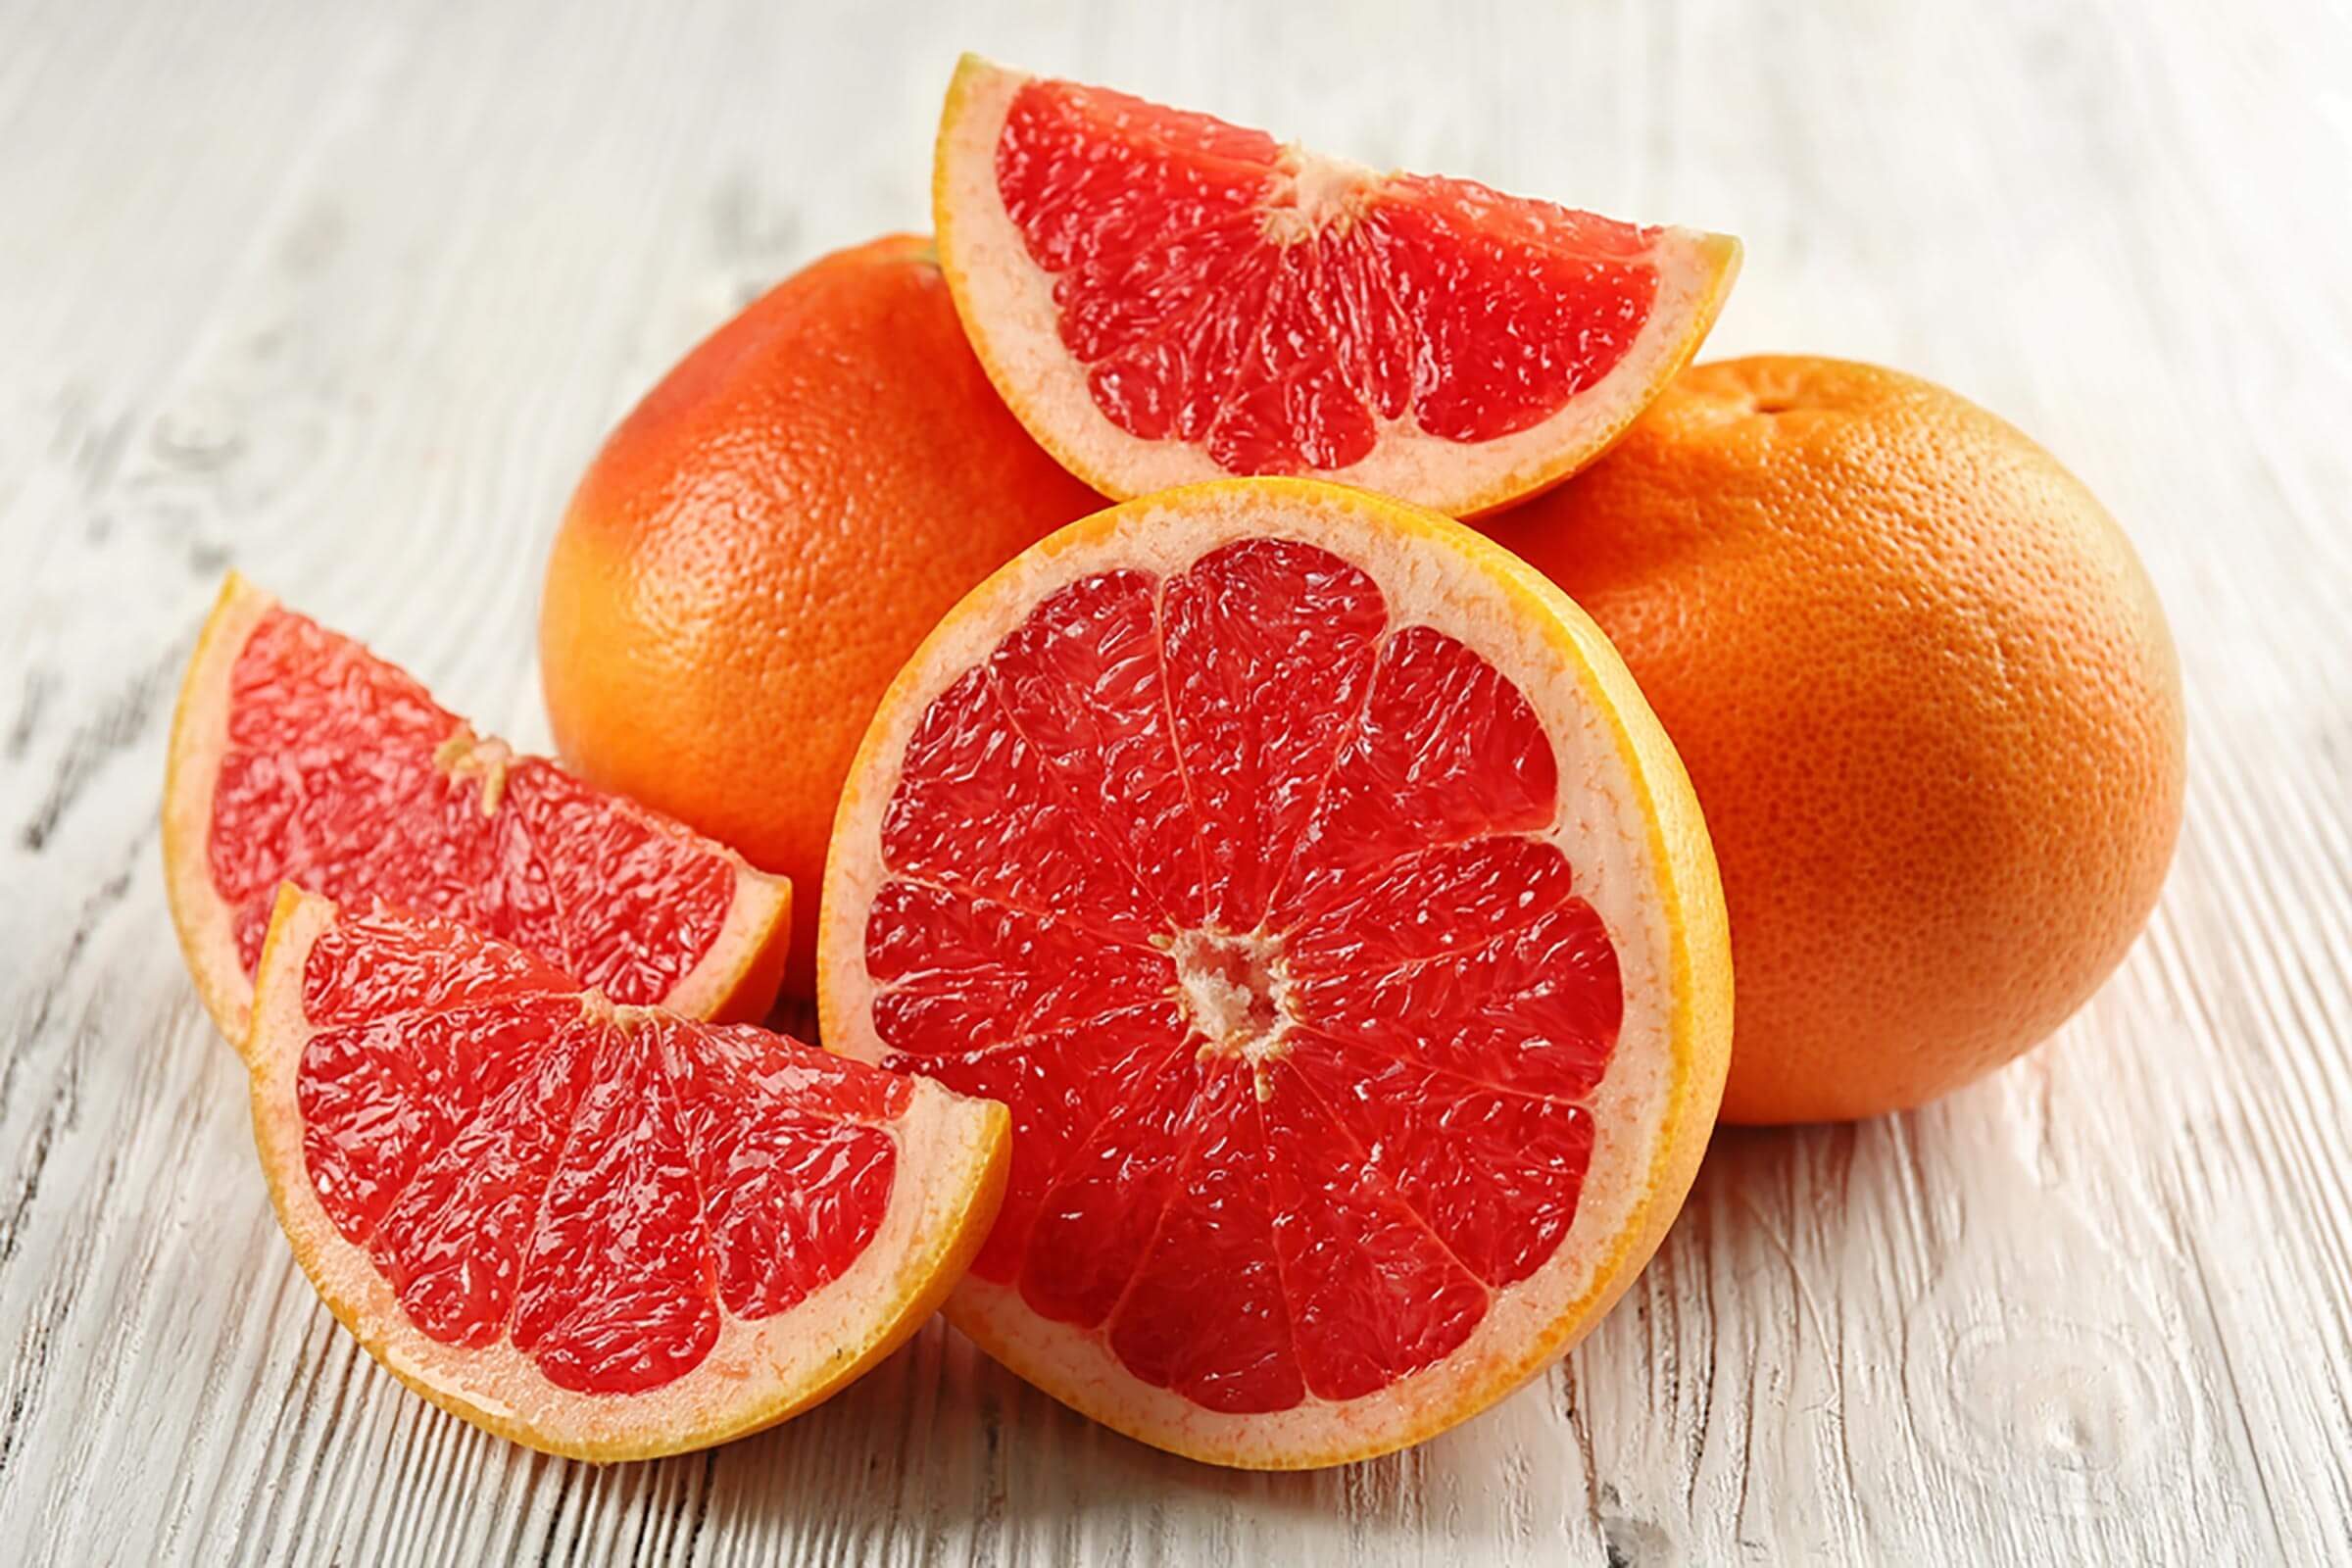 10 of the Healthiest Fruits You Can Buy to Stay Healthy